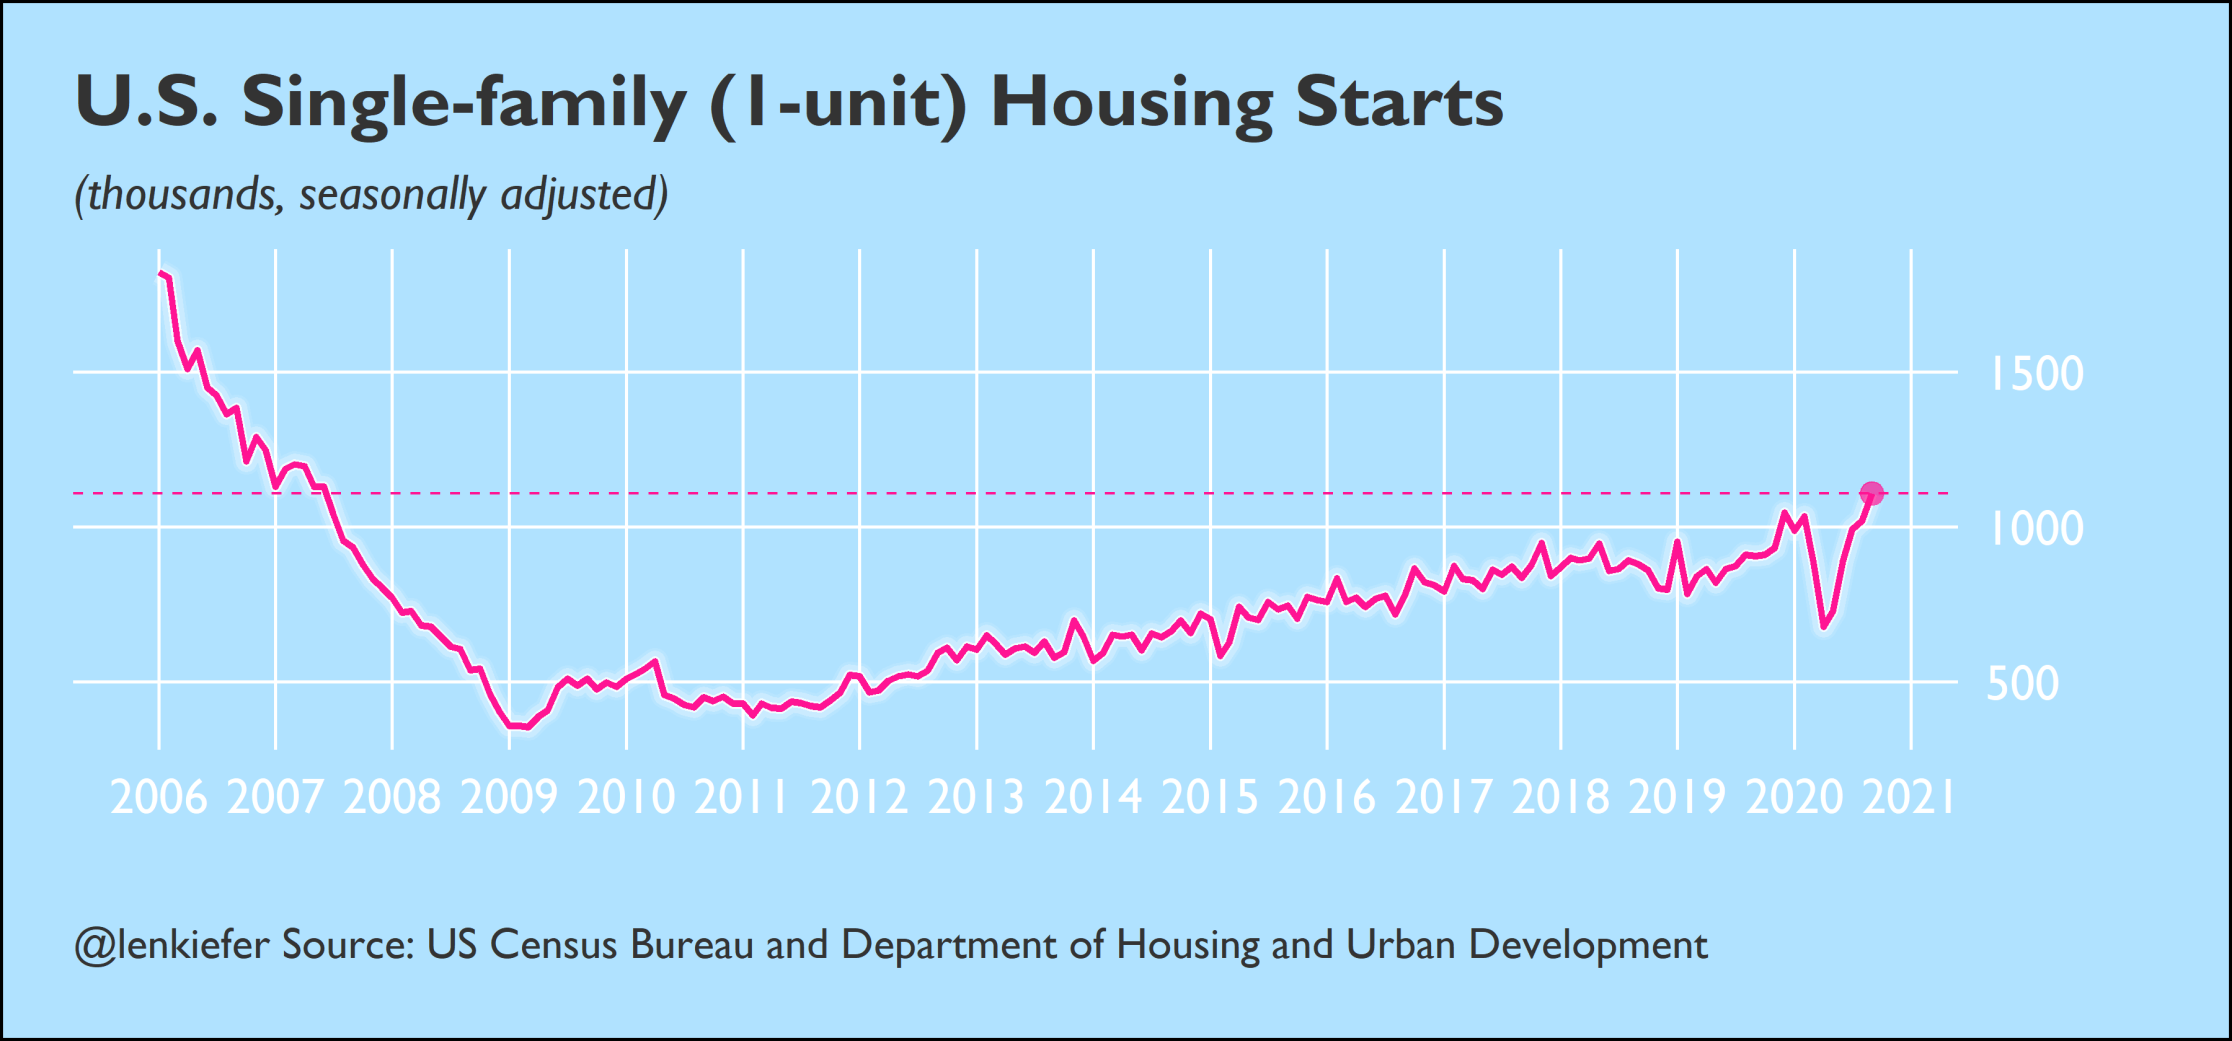 Time series chart of 1-unit housing starts